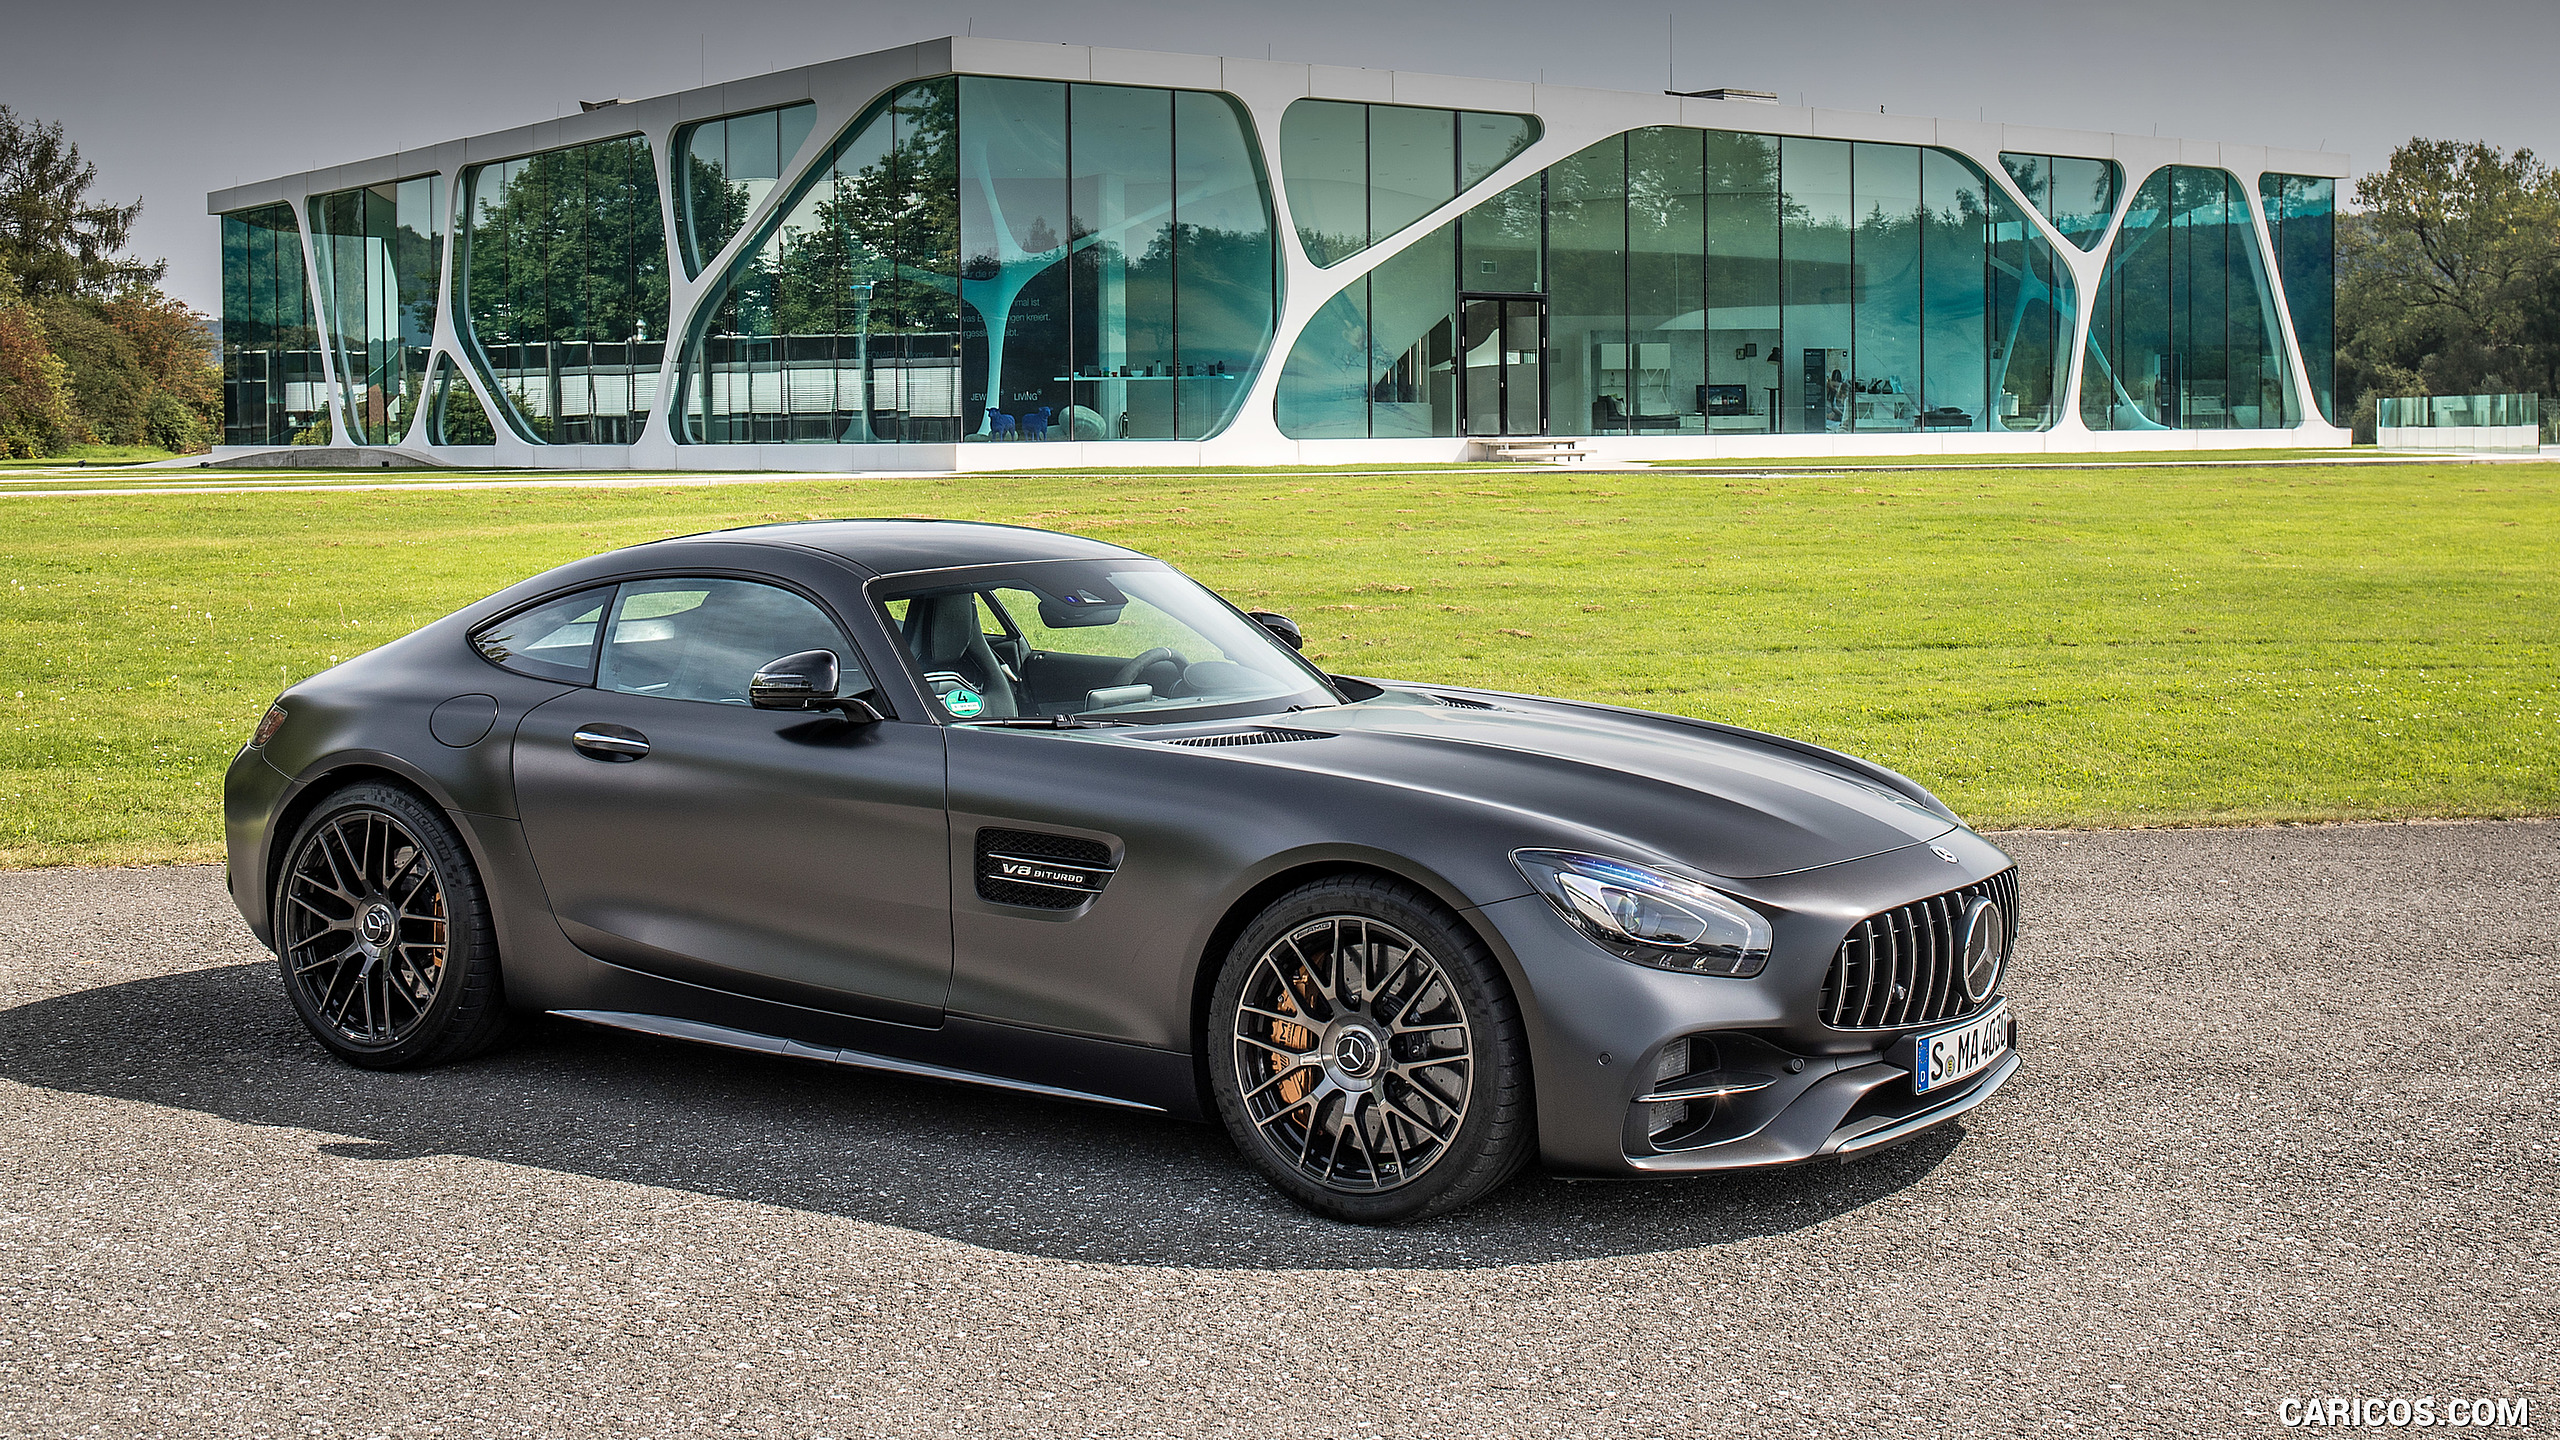 2018 Mercedes-AMG GT C Coupe Edition 50 - Front Three-Quarter, #28 of 70